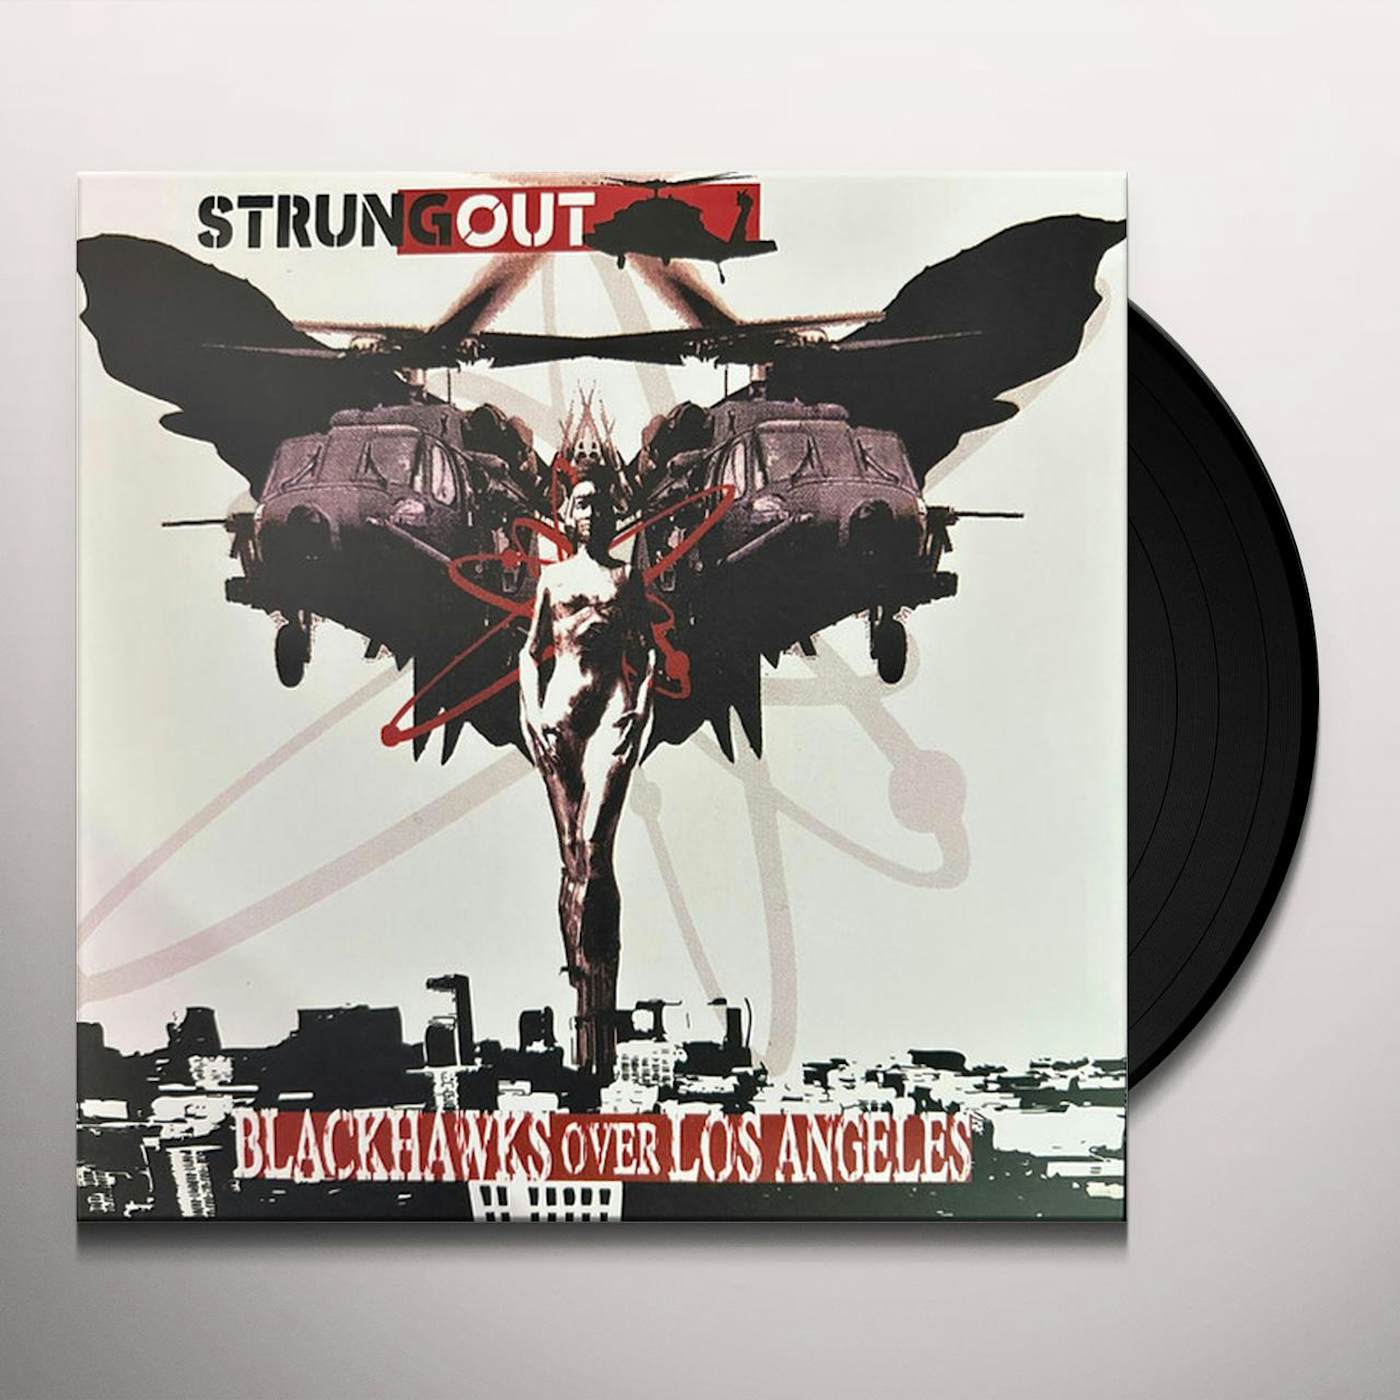 Strung Out Blackhawks over Los Angeles Vinyl Record